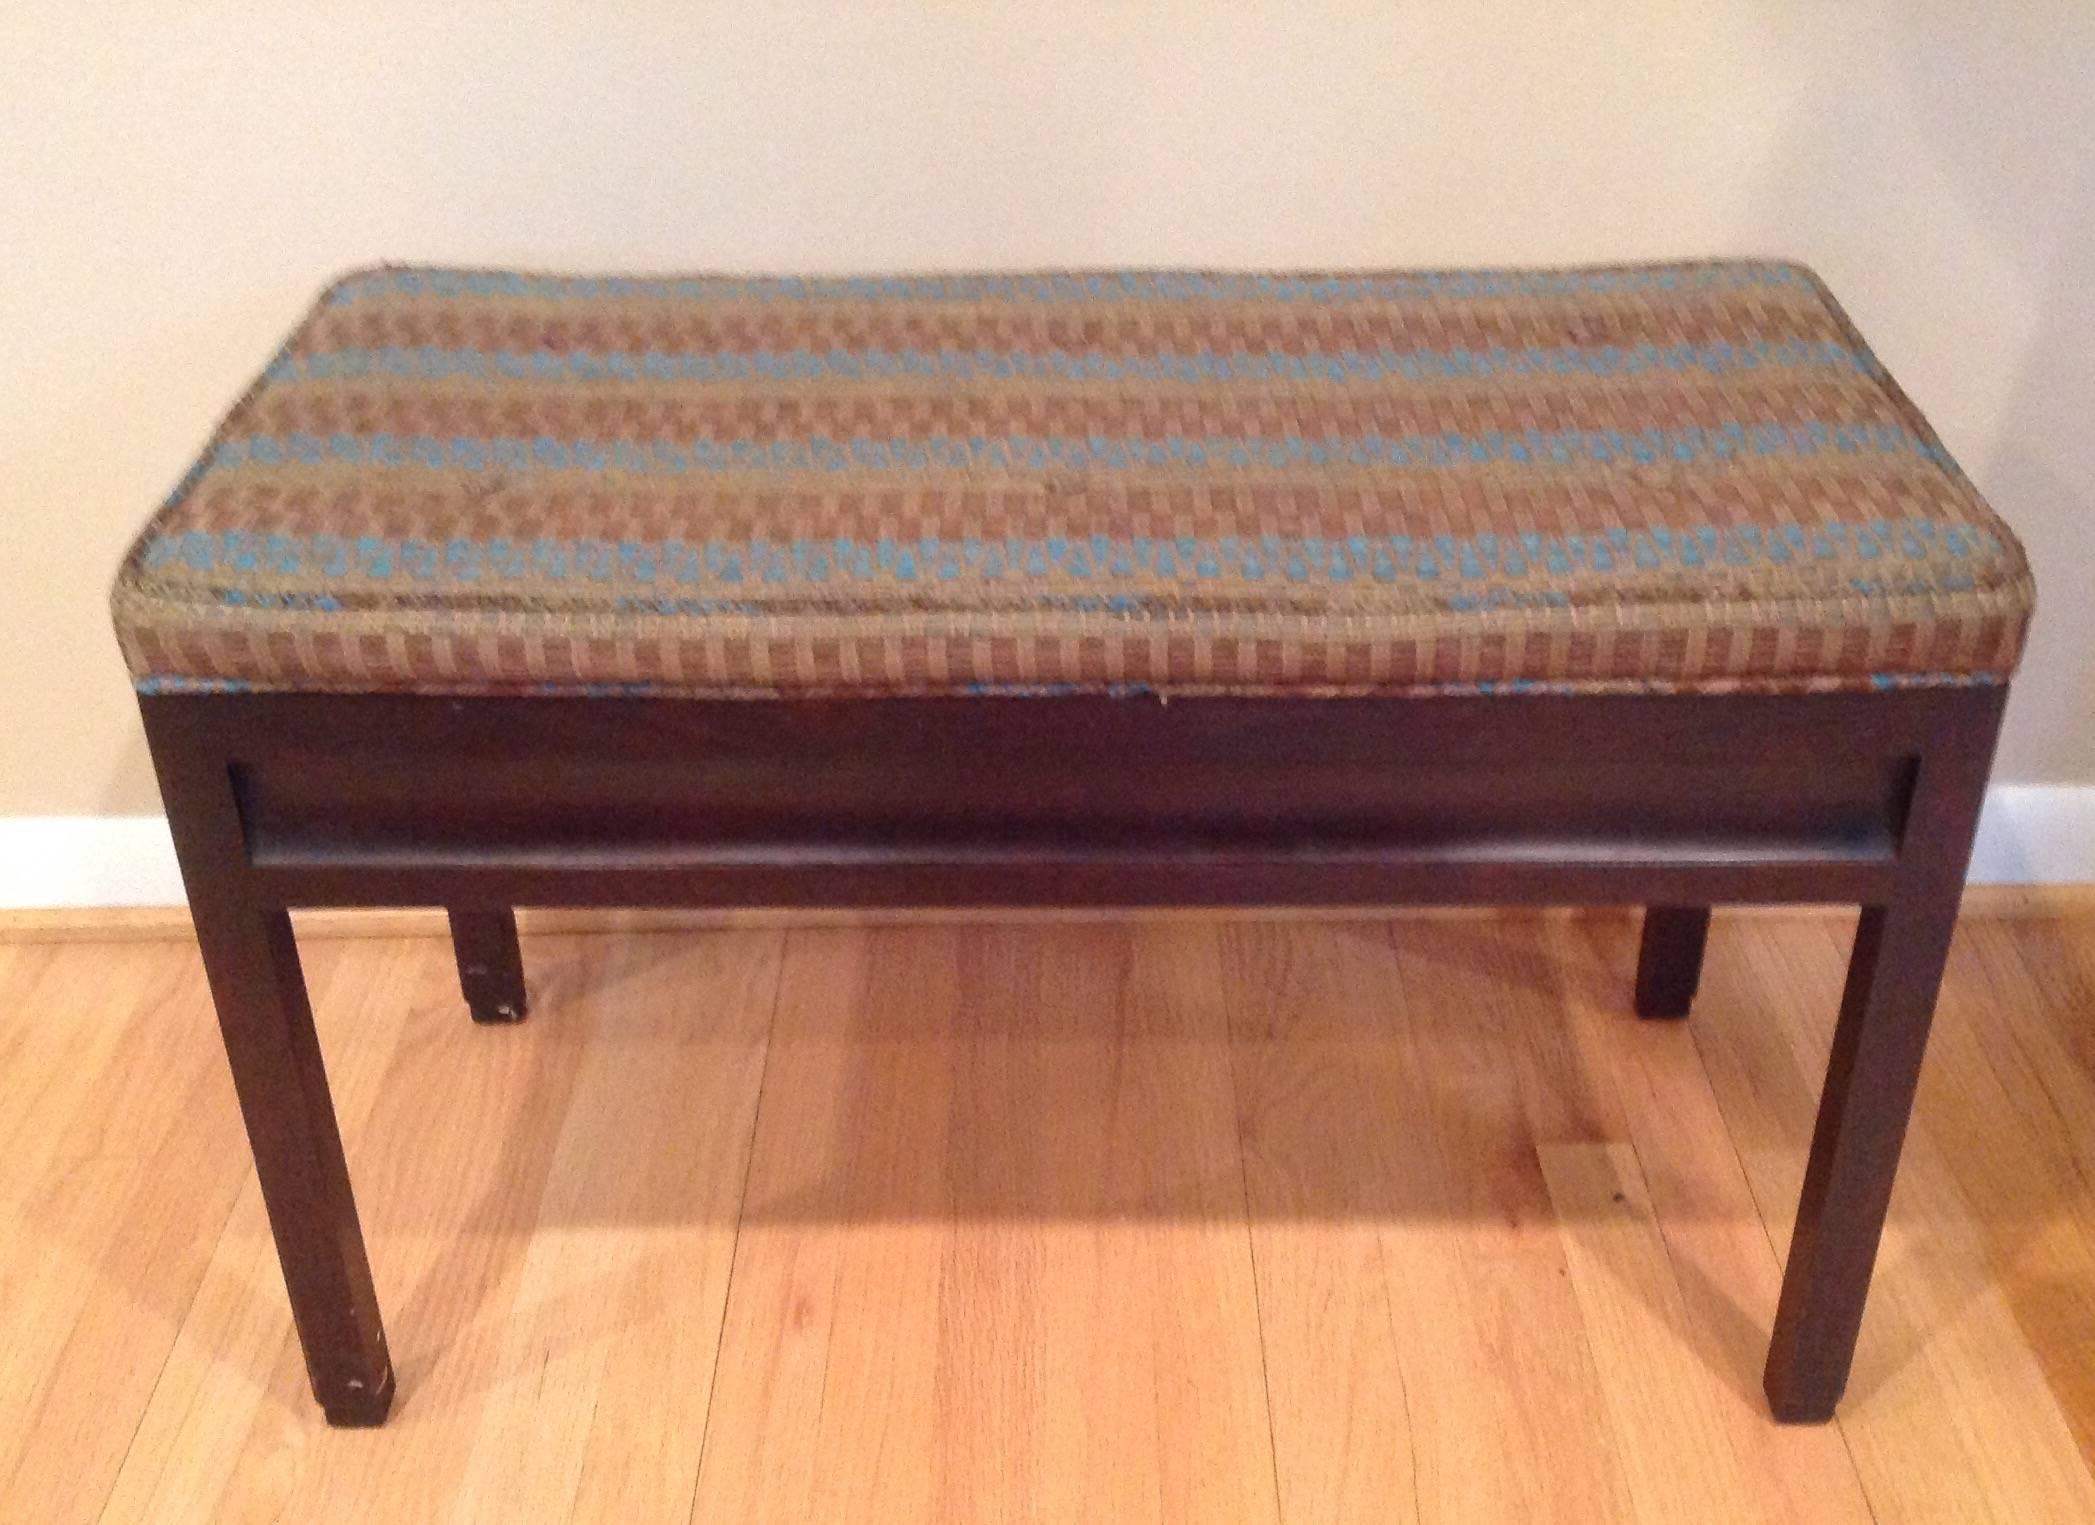 Amazing Mid-Century Modern flip-top storage bench by Edward Wormley for Dunbar. Signed with original gold D placard.